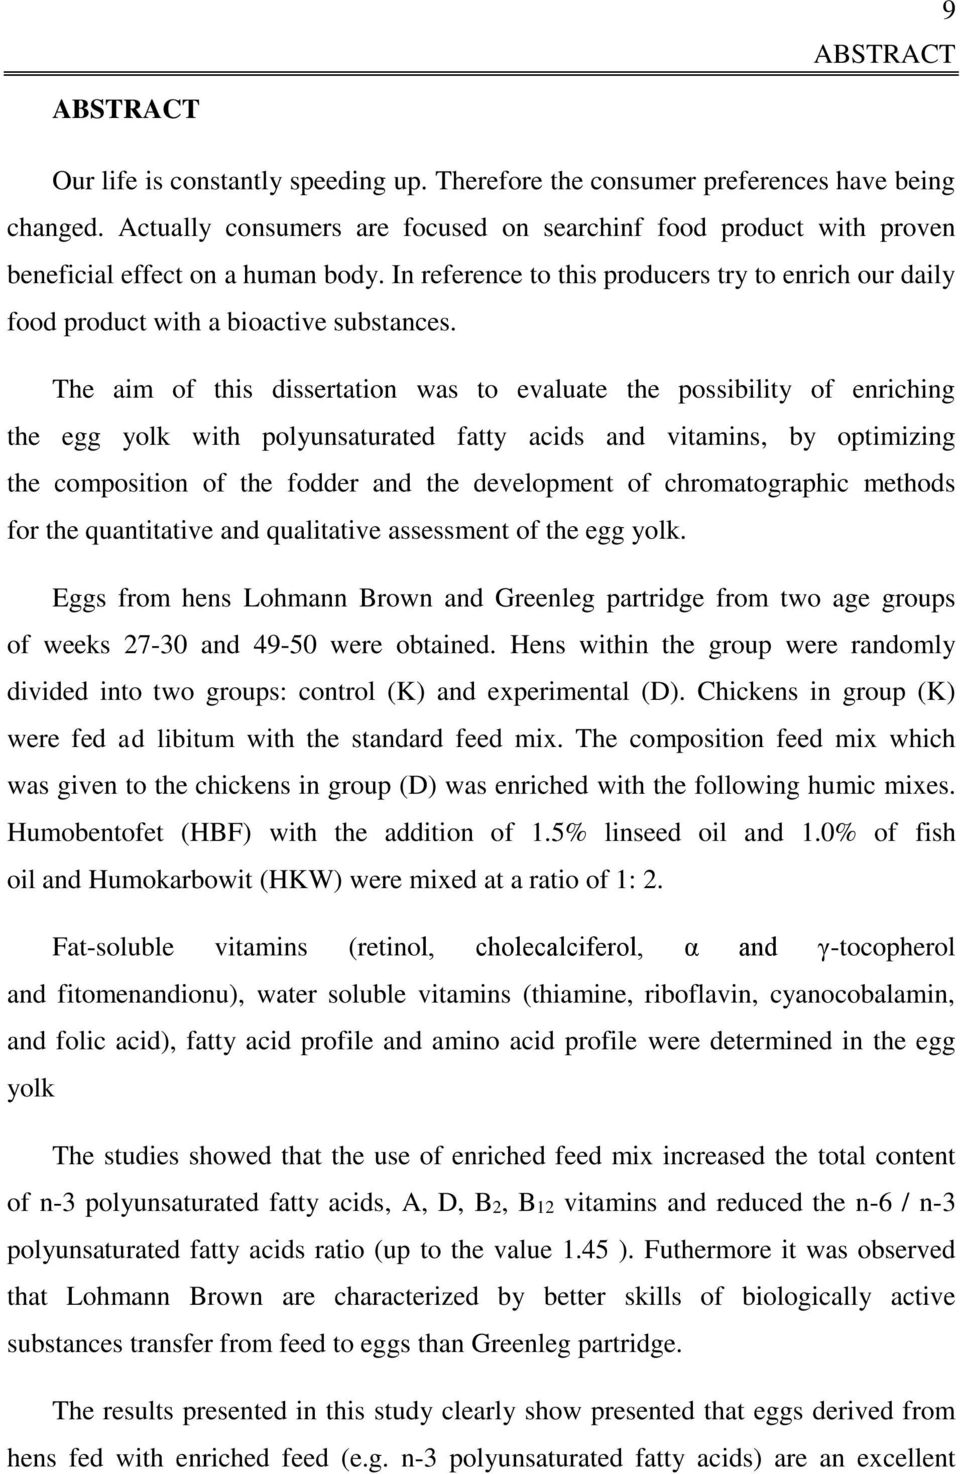 The aim of this dissertation was to evaluate the possibility of enriching the egg yolk with polyunsaturated fatty acids and vitamins, by optimizing the composition of the fodder and the development